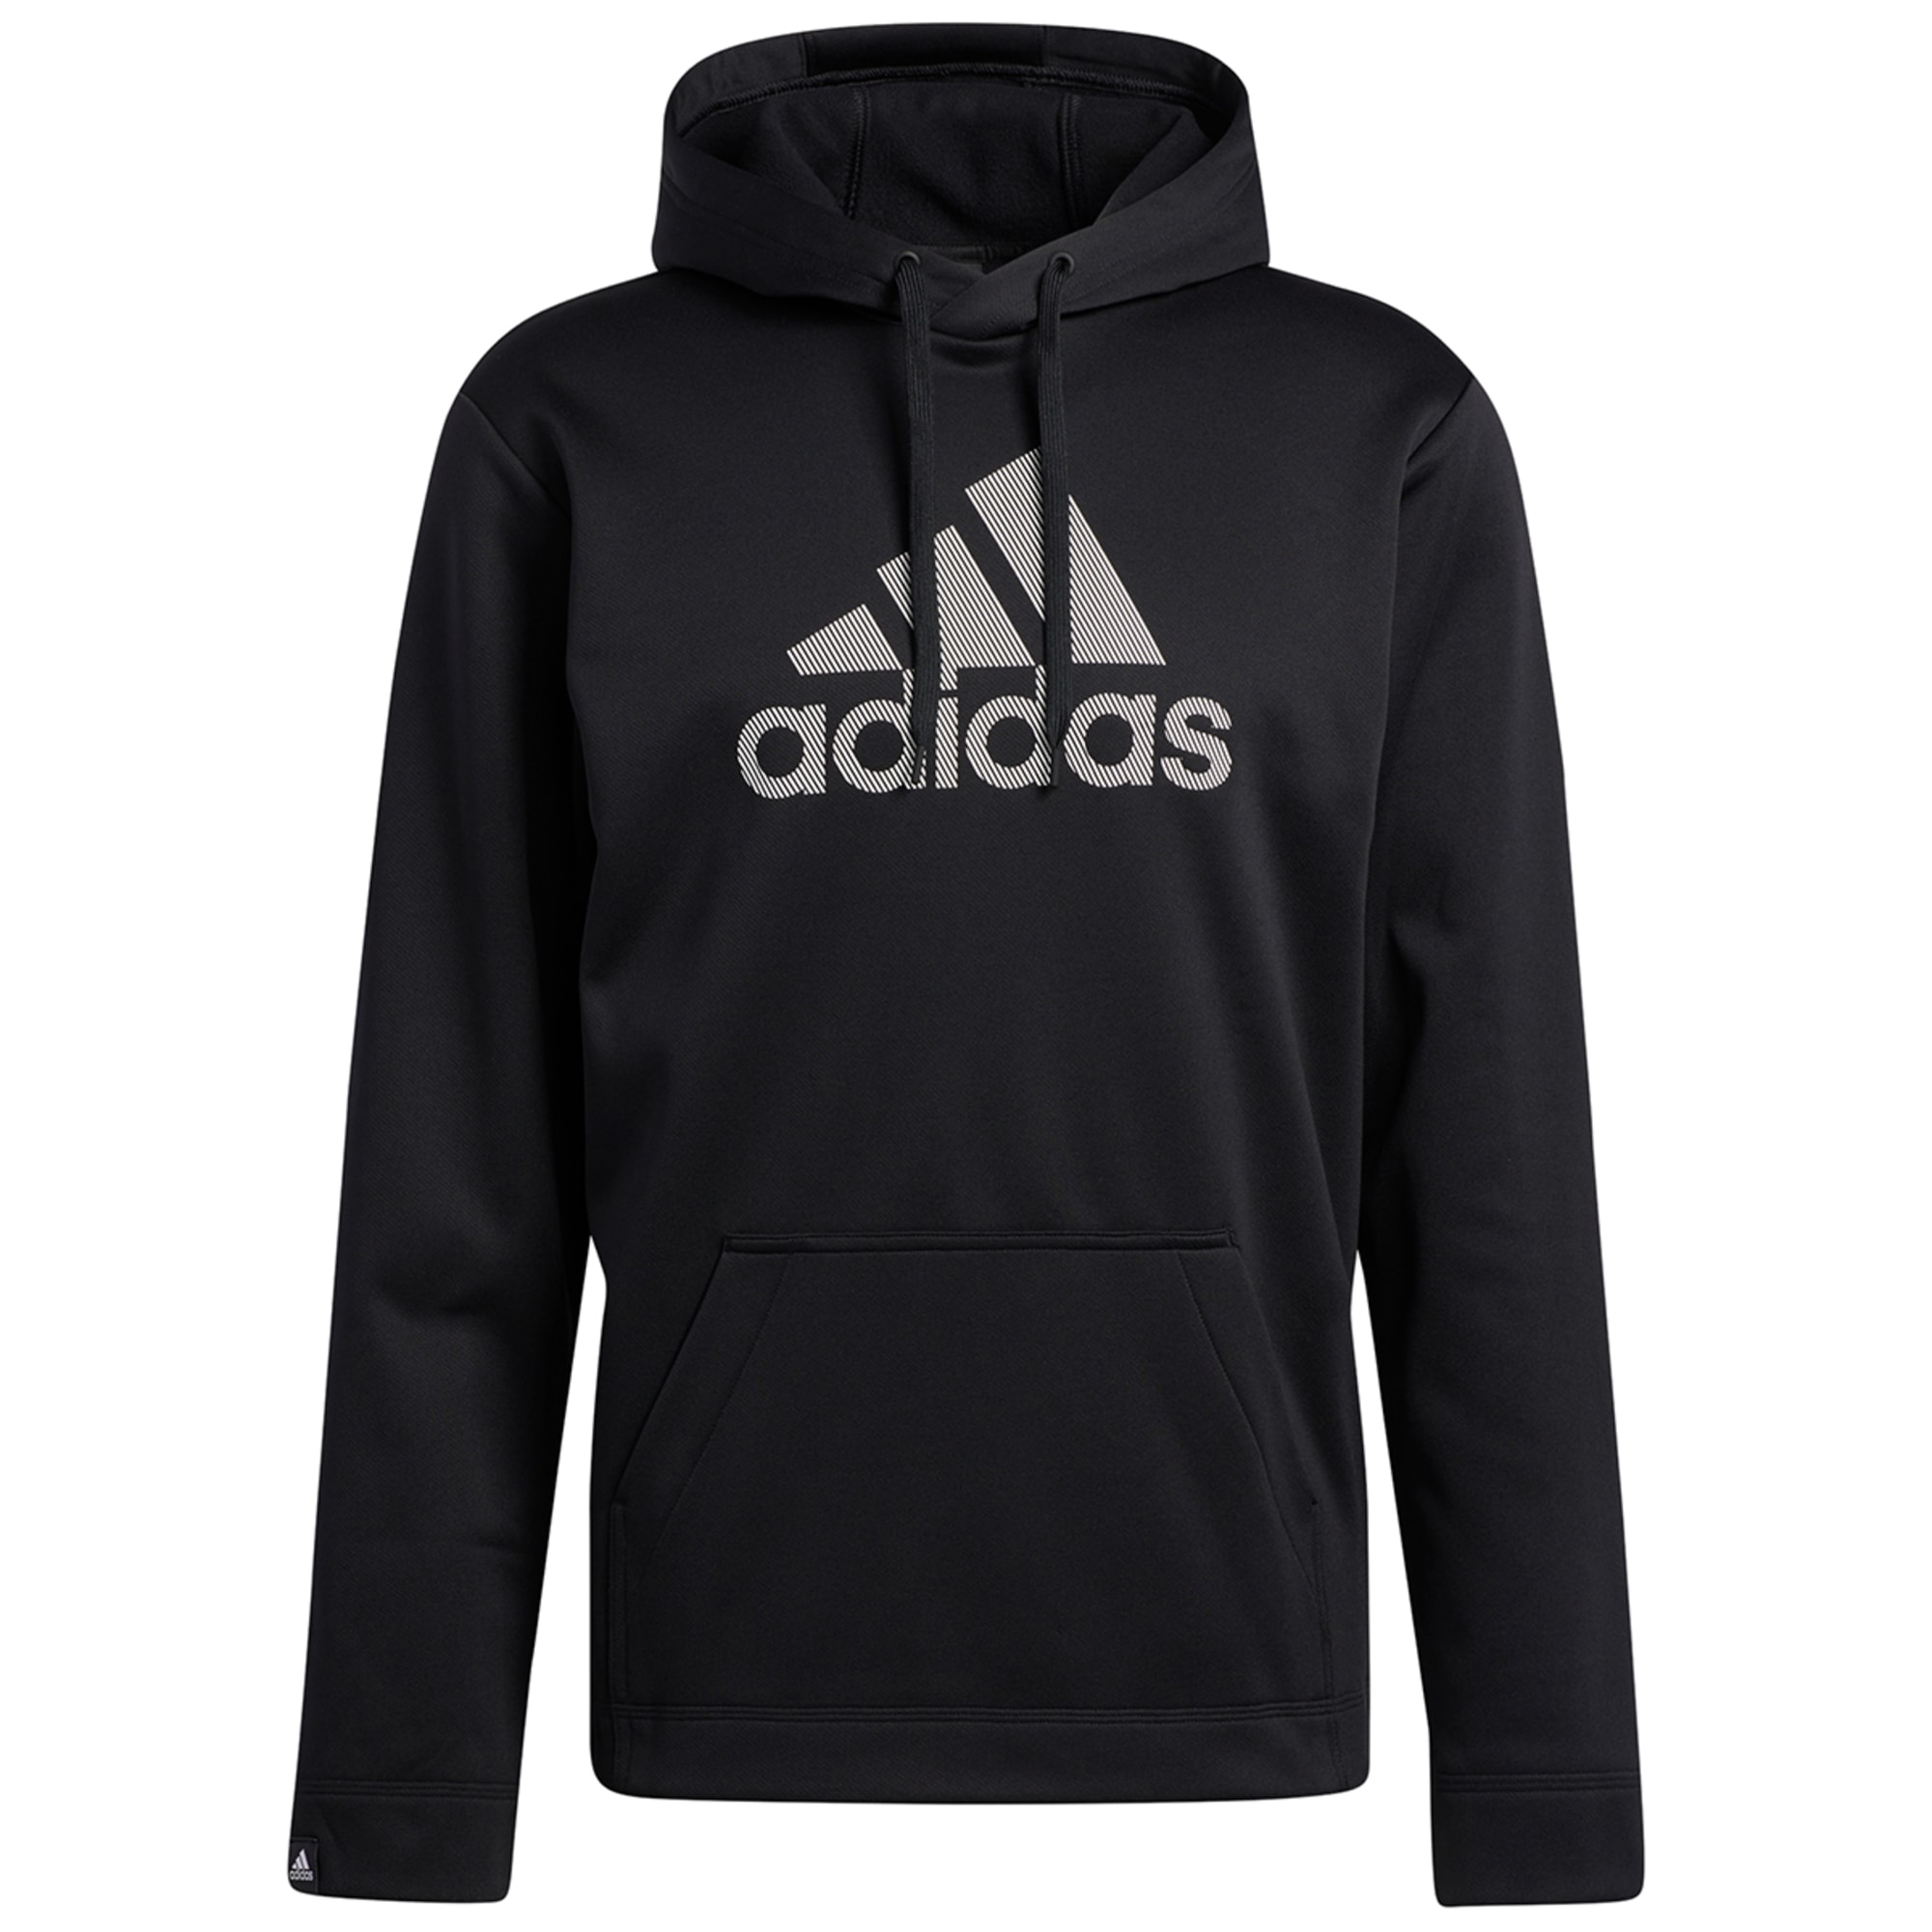 ADIDAS Men's Game and Go Pullover Hoodie - Eastern Mountain Sports